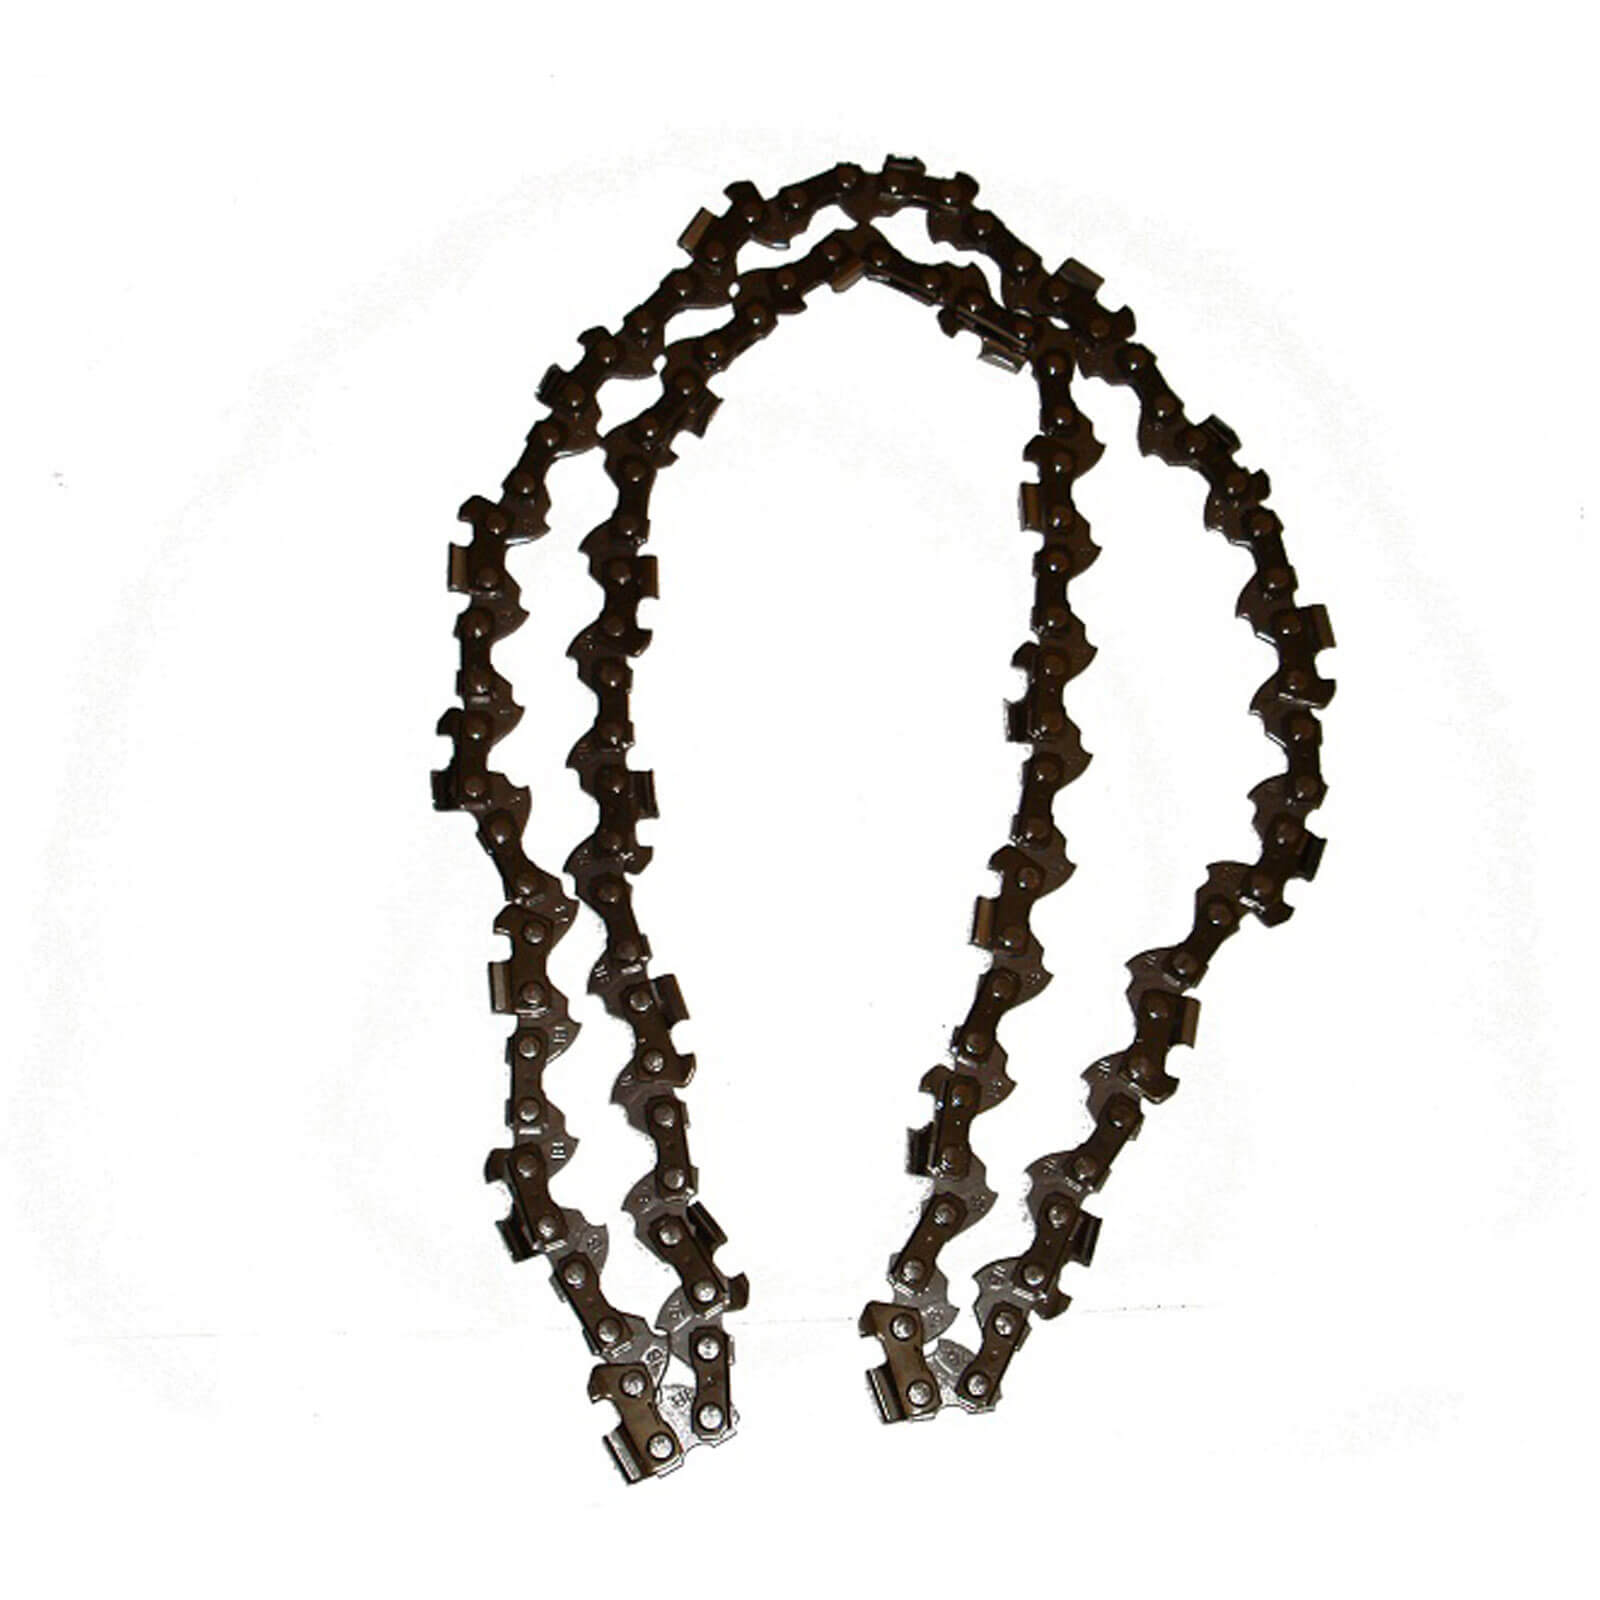 Photo of Handy Replacement Chain To Fit Bosch Ake 40-19s- 40b- 400 And Handy Thecs16- Thpcs16- Thcs45 Chainsaws 400mm